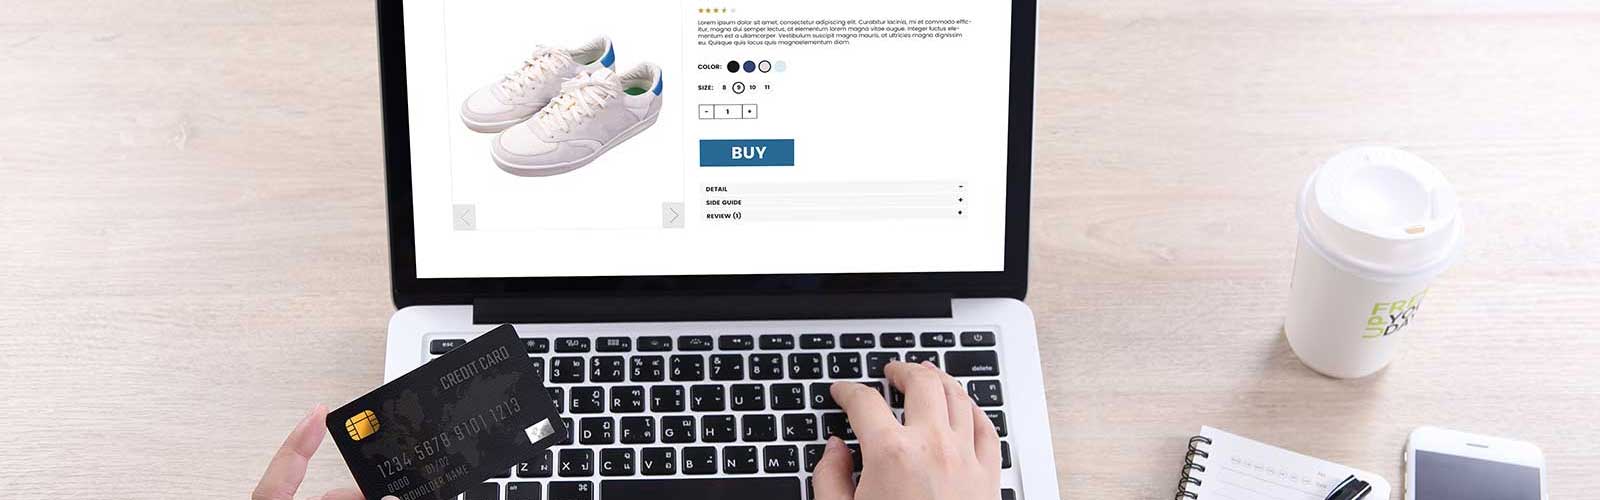 person buying shoes on an ecommerce website